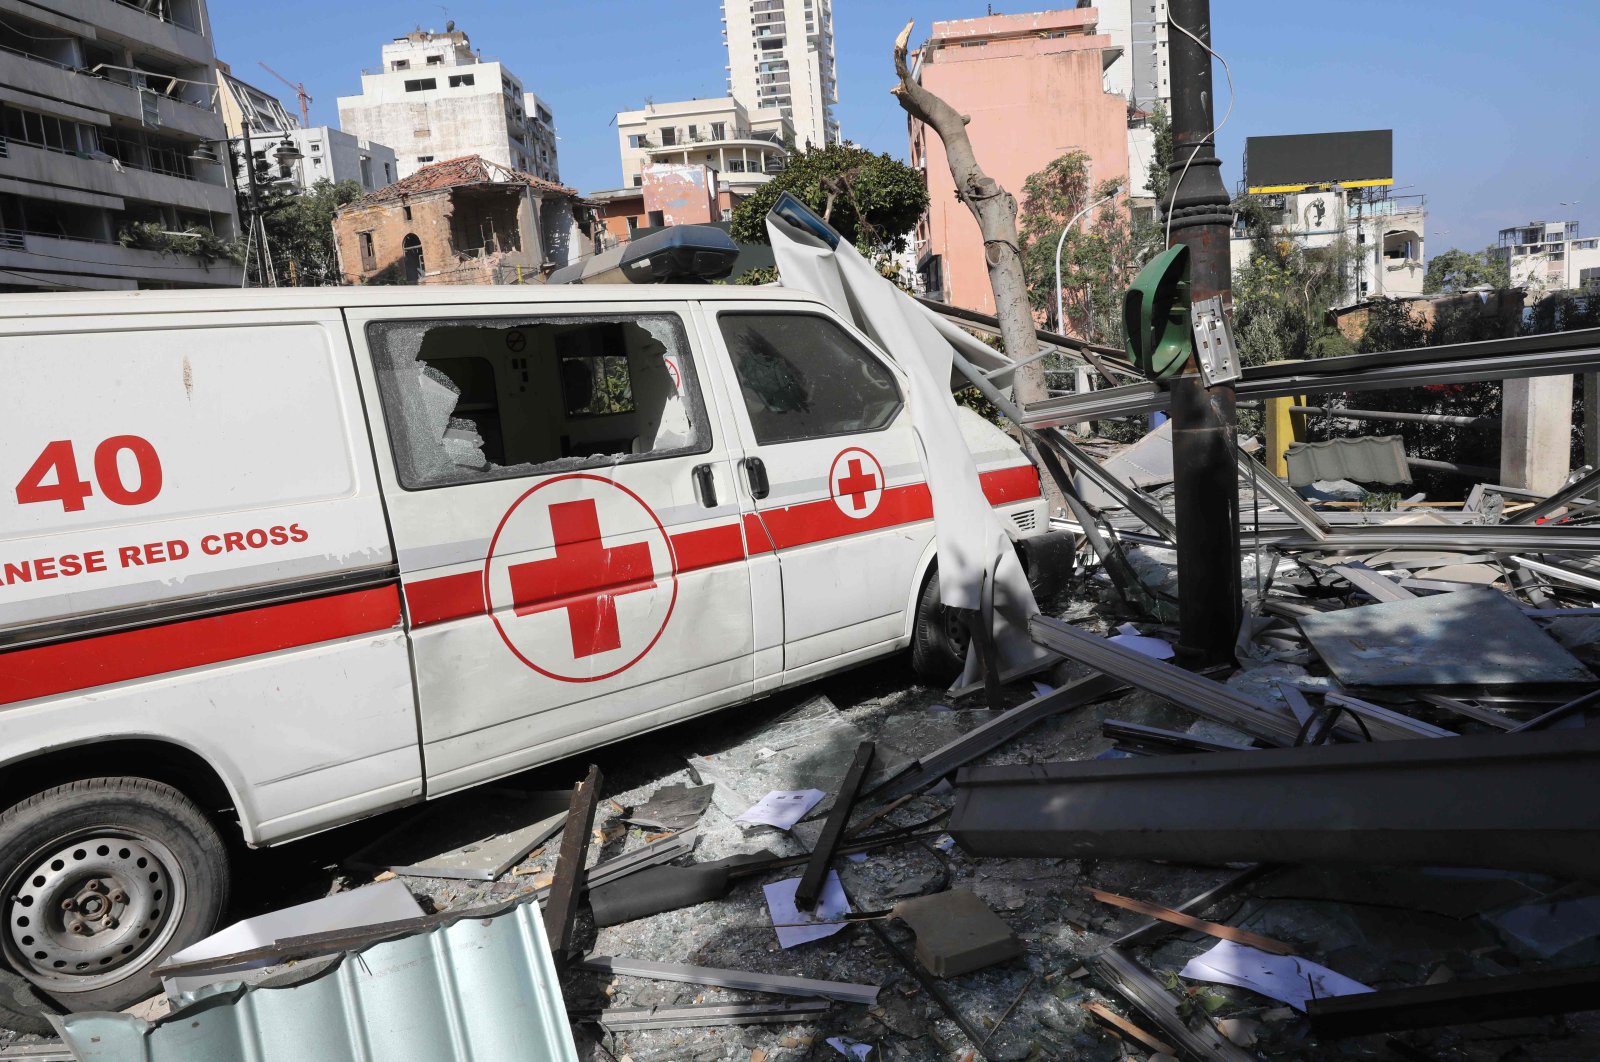 An emergency command vehicle of the Lebanese Red Cross is pictured in the aftermath of yesterday's blast that tore through Lebanon's capital and resulted from the ignition of a huge depot of ammonium nitrate at Beirut's port, on Aug. 5, 2020. (AFP Photo)